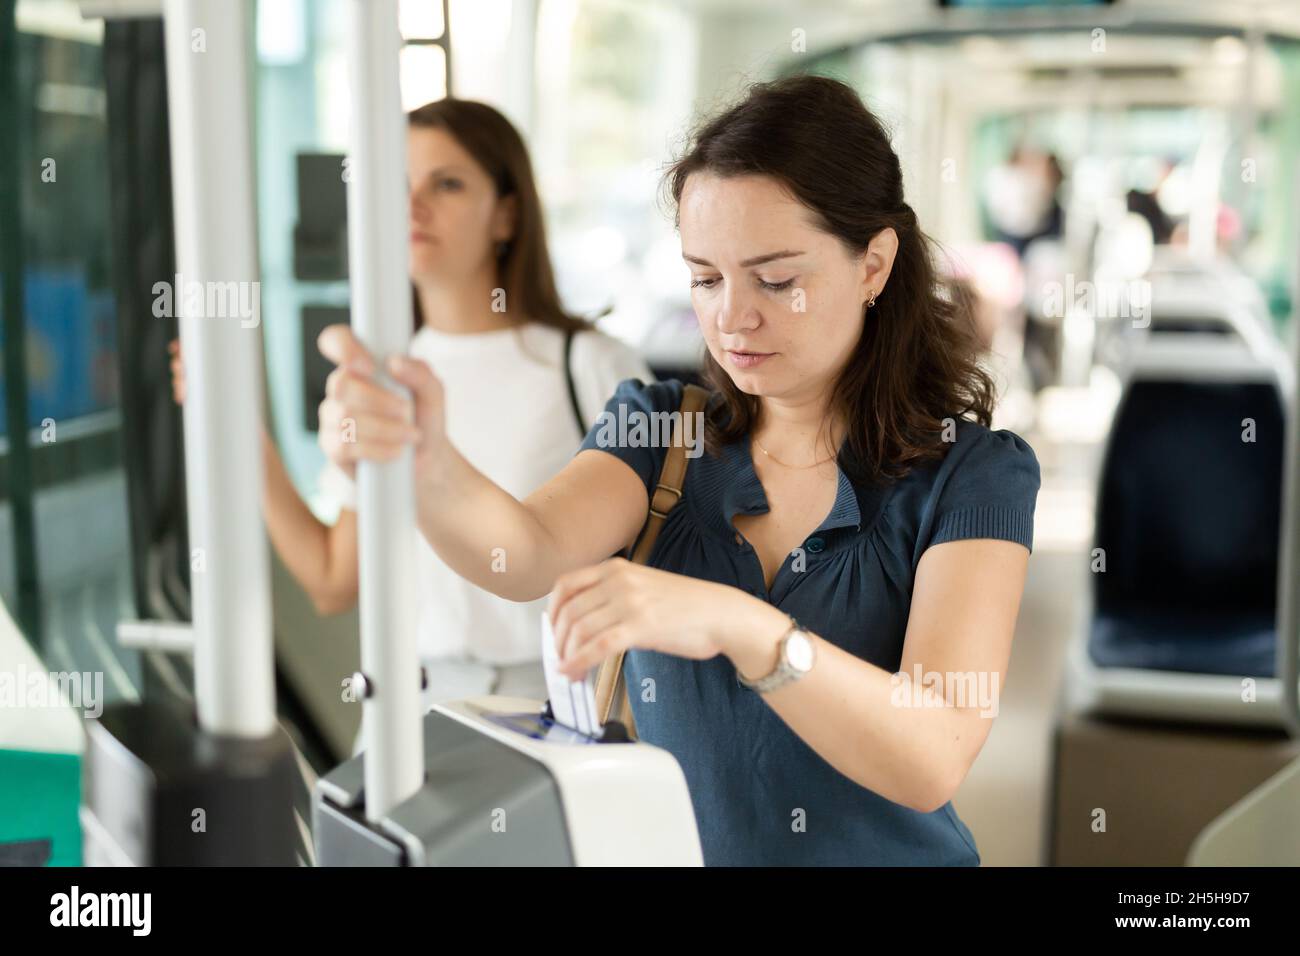 Woman validating ticket in public transport Stock Photo